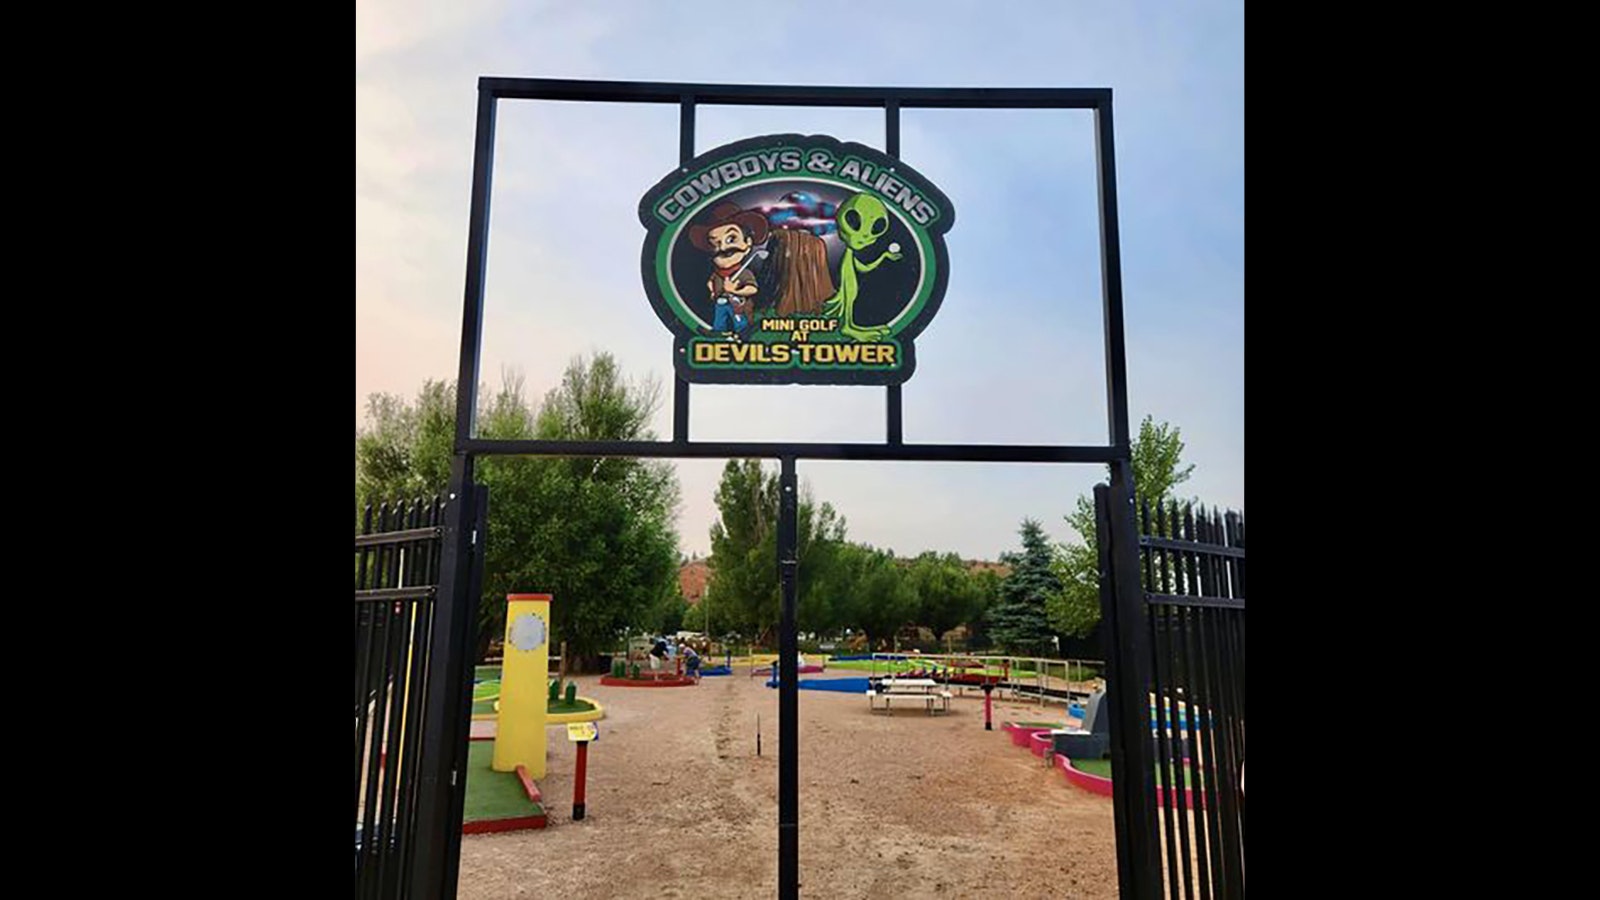 The new sign just put in for the miniature golfing.